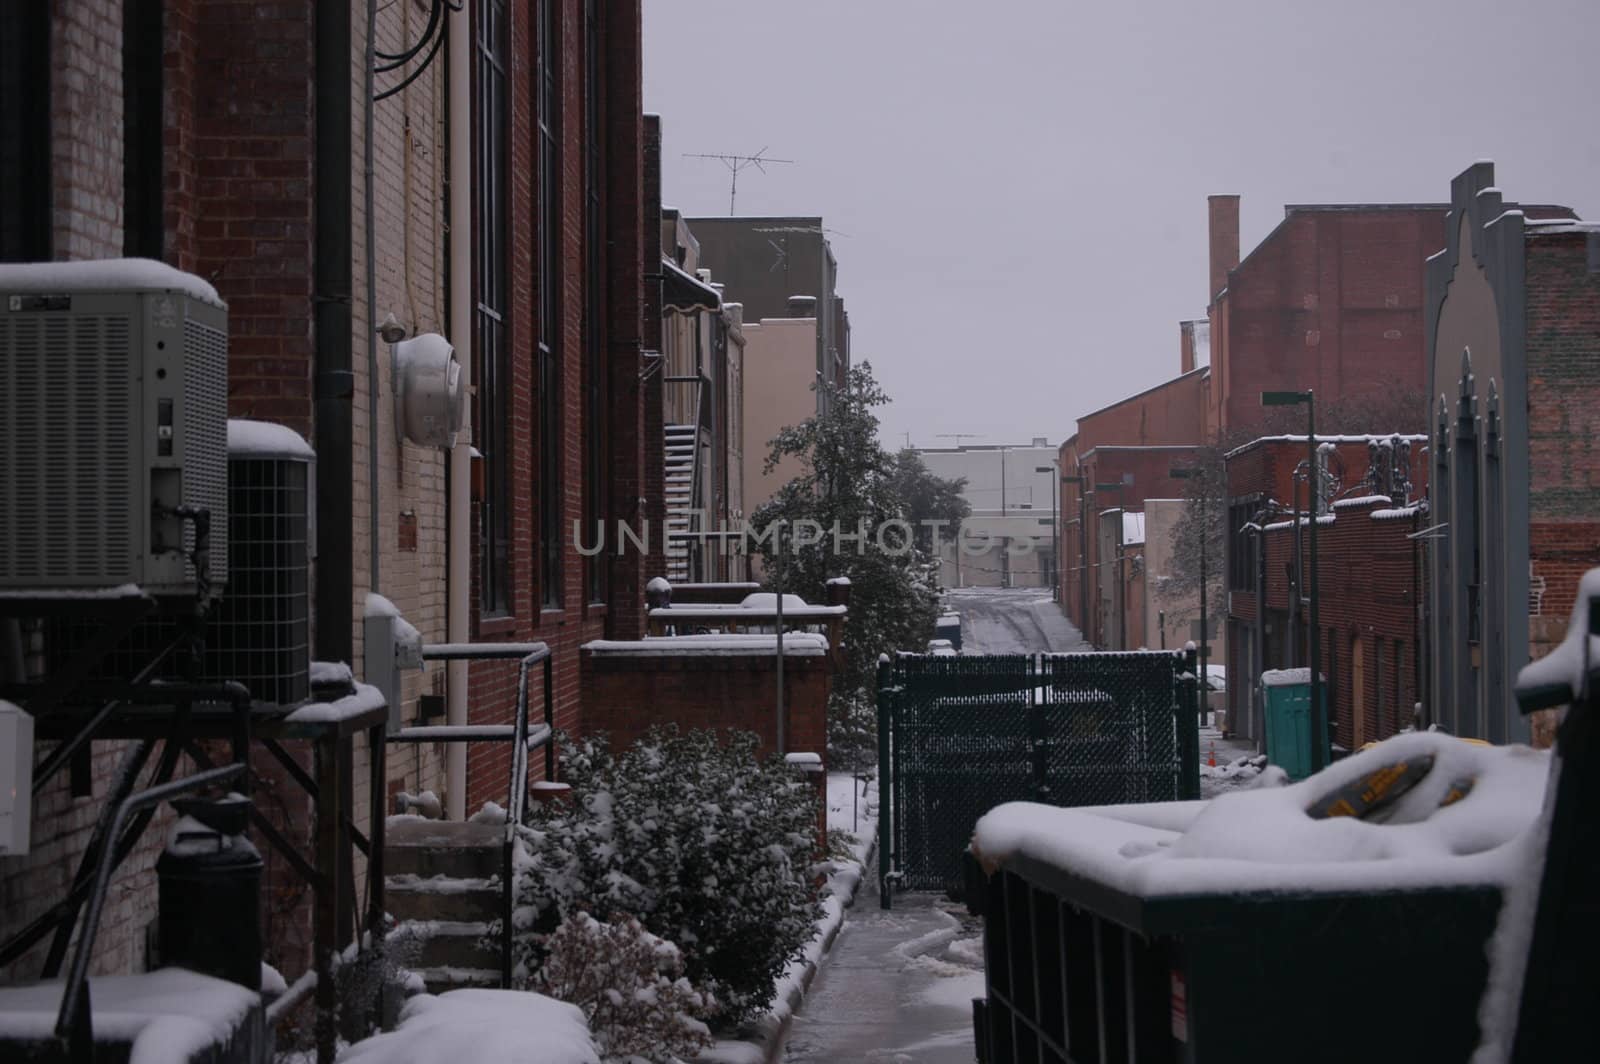 Behind every city is a back alley, This one is seen in the winter time.